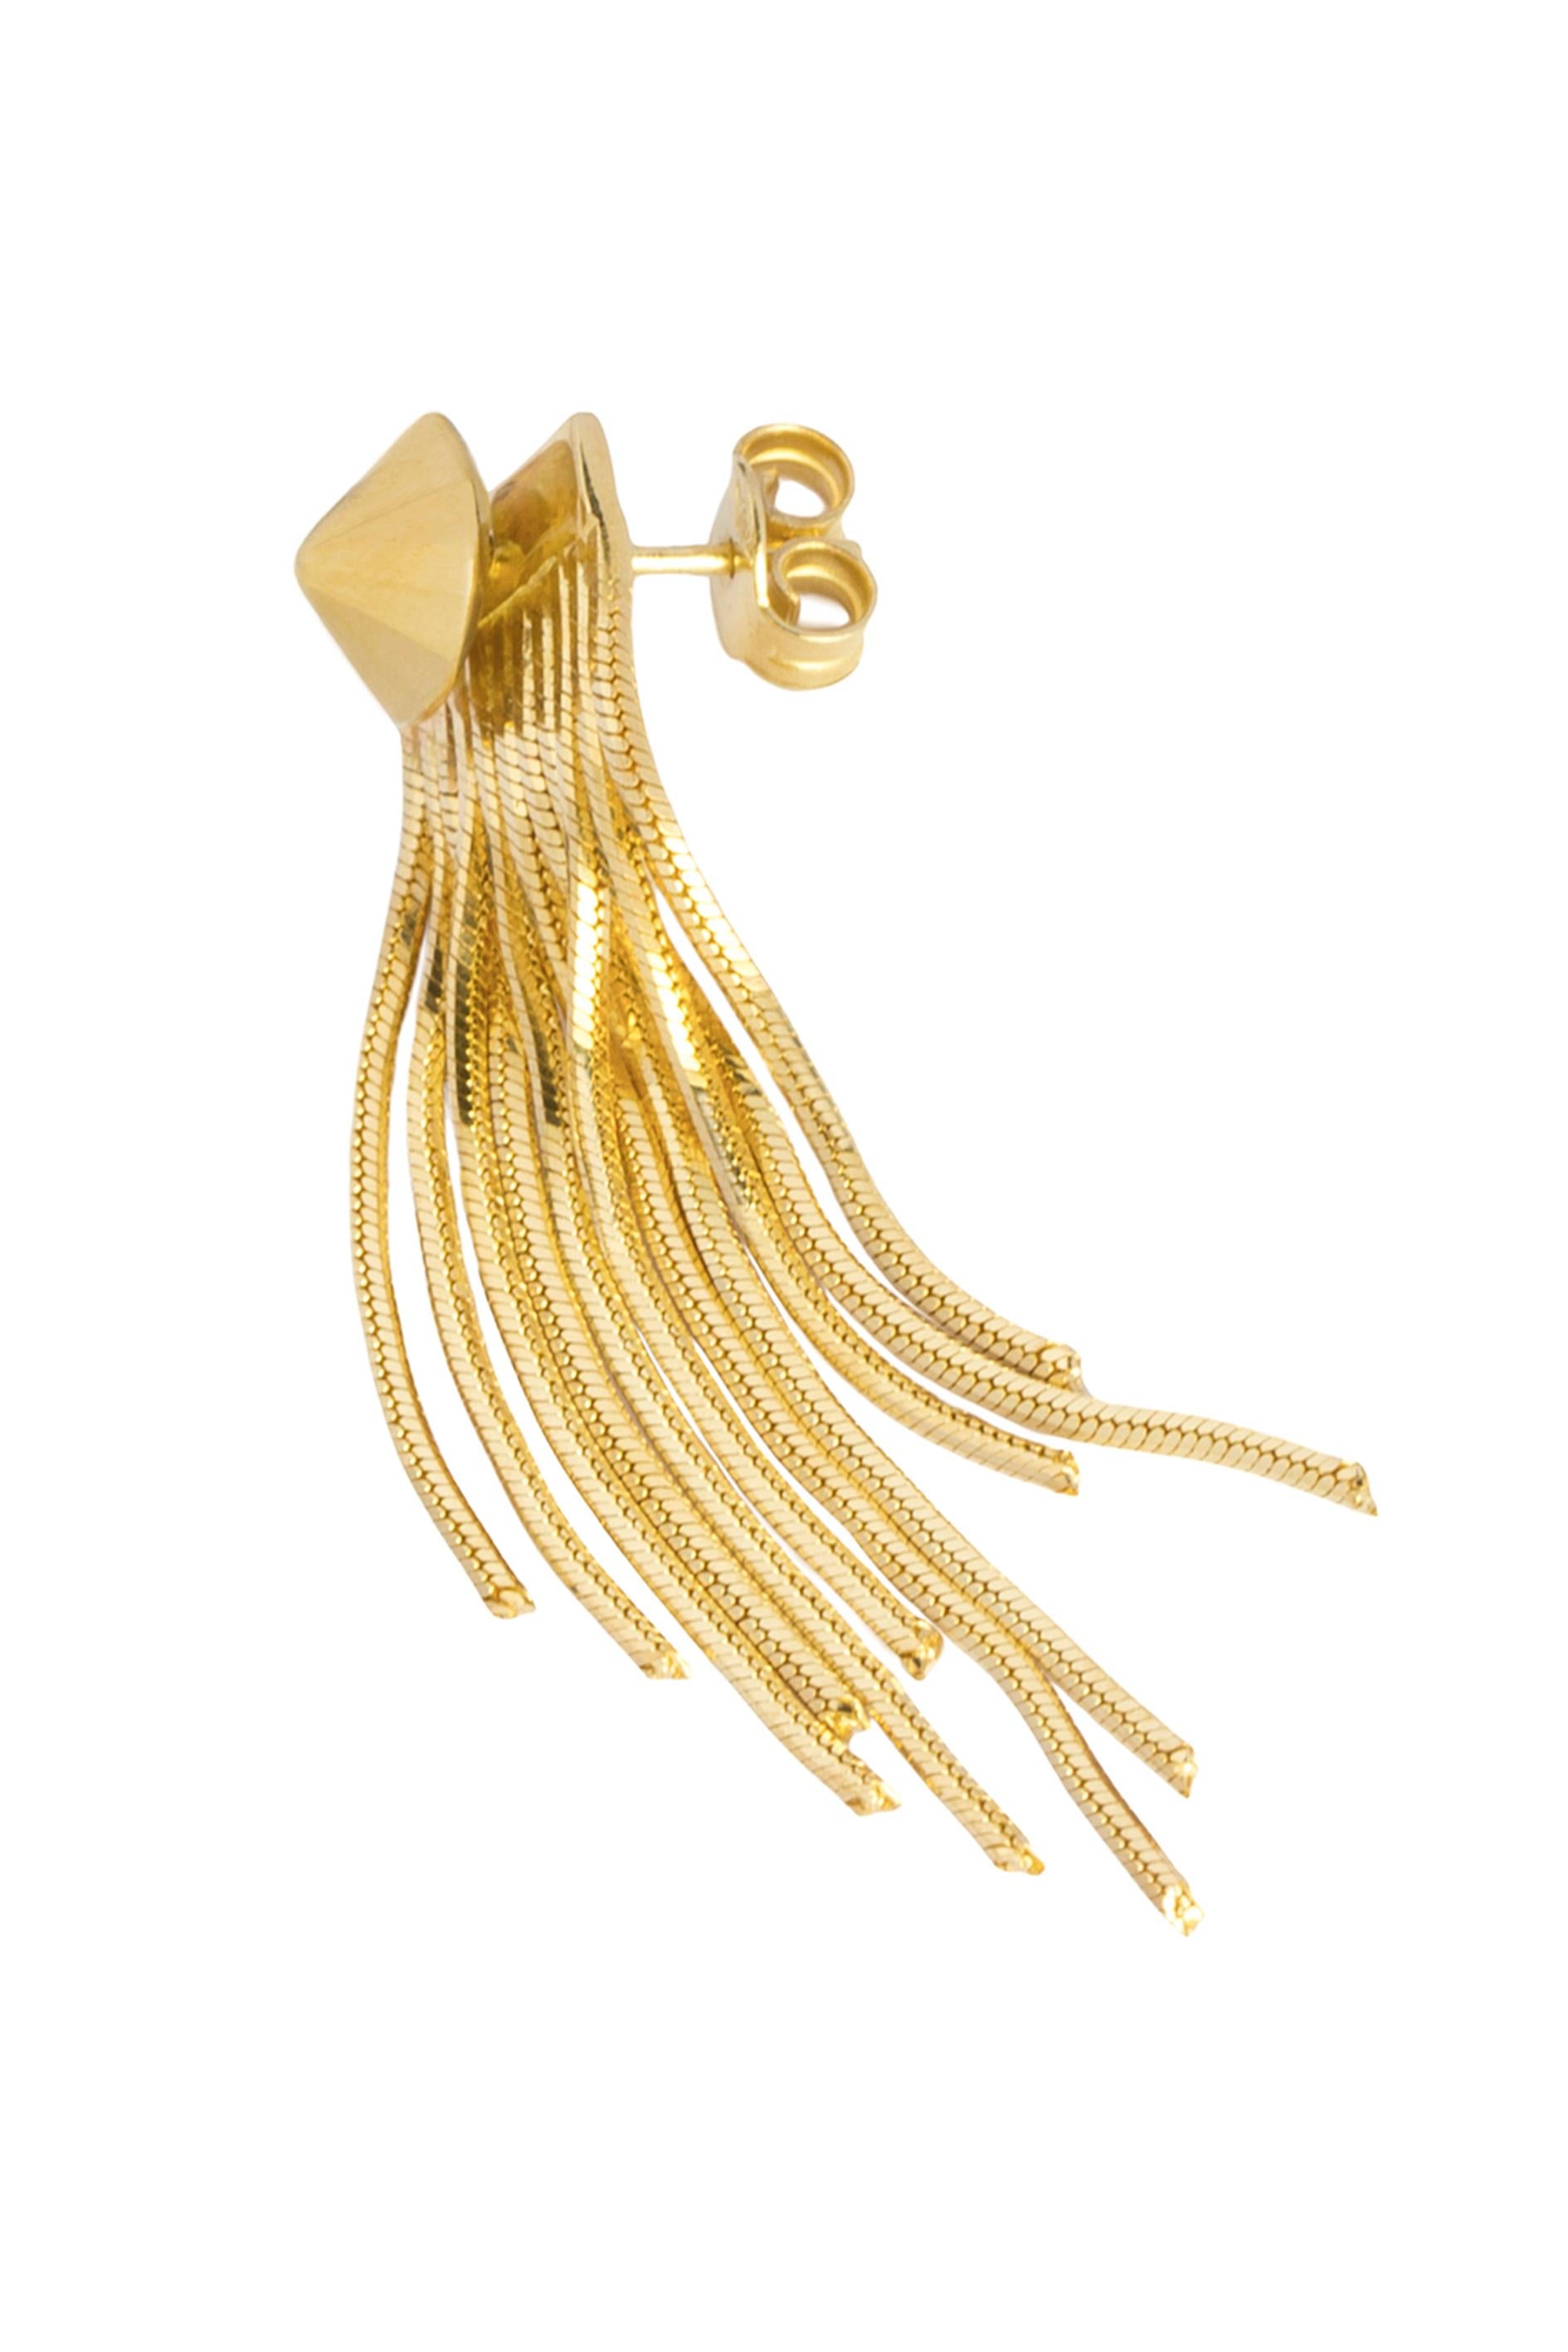 Iosselliani captures both edgy and elegant look with this unique 18 karat gold fringed single earring. The dynamic earring is a combination of 2 pieces into 1: a 18 Karat gold soft fringe made of 11 swinging threads triangularly shaped to add